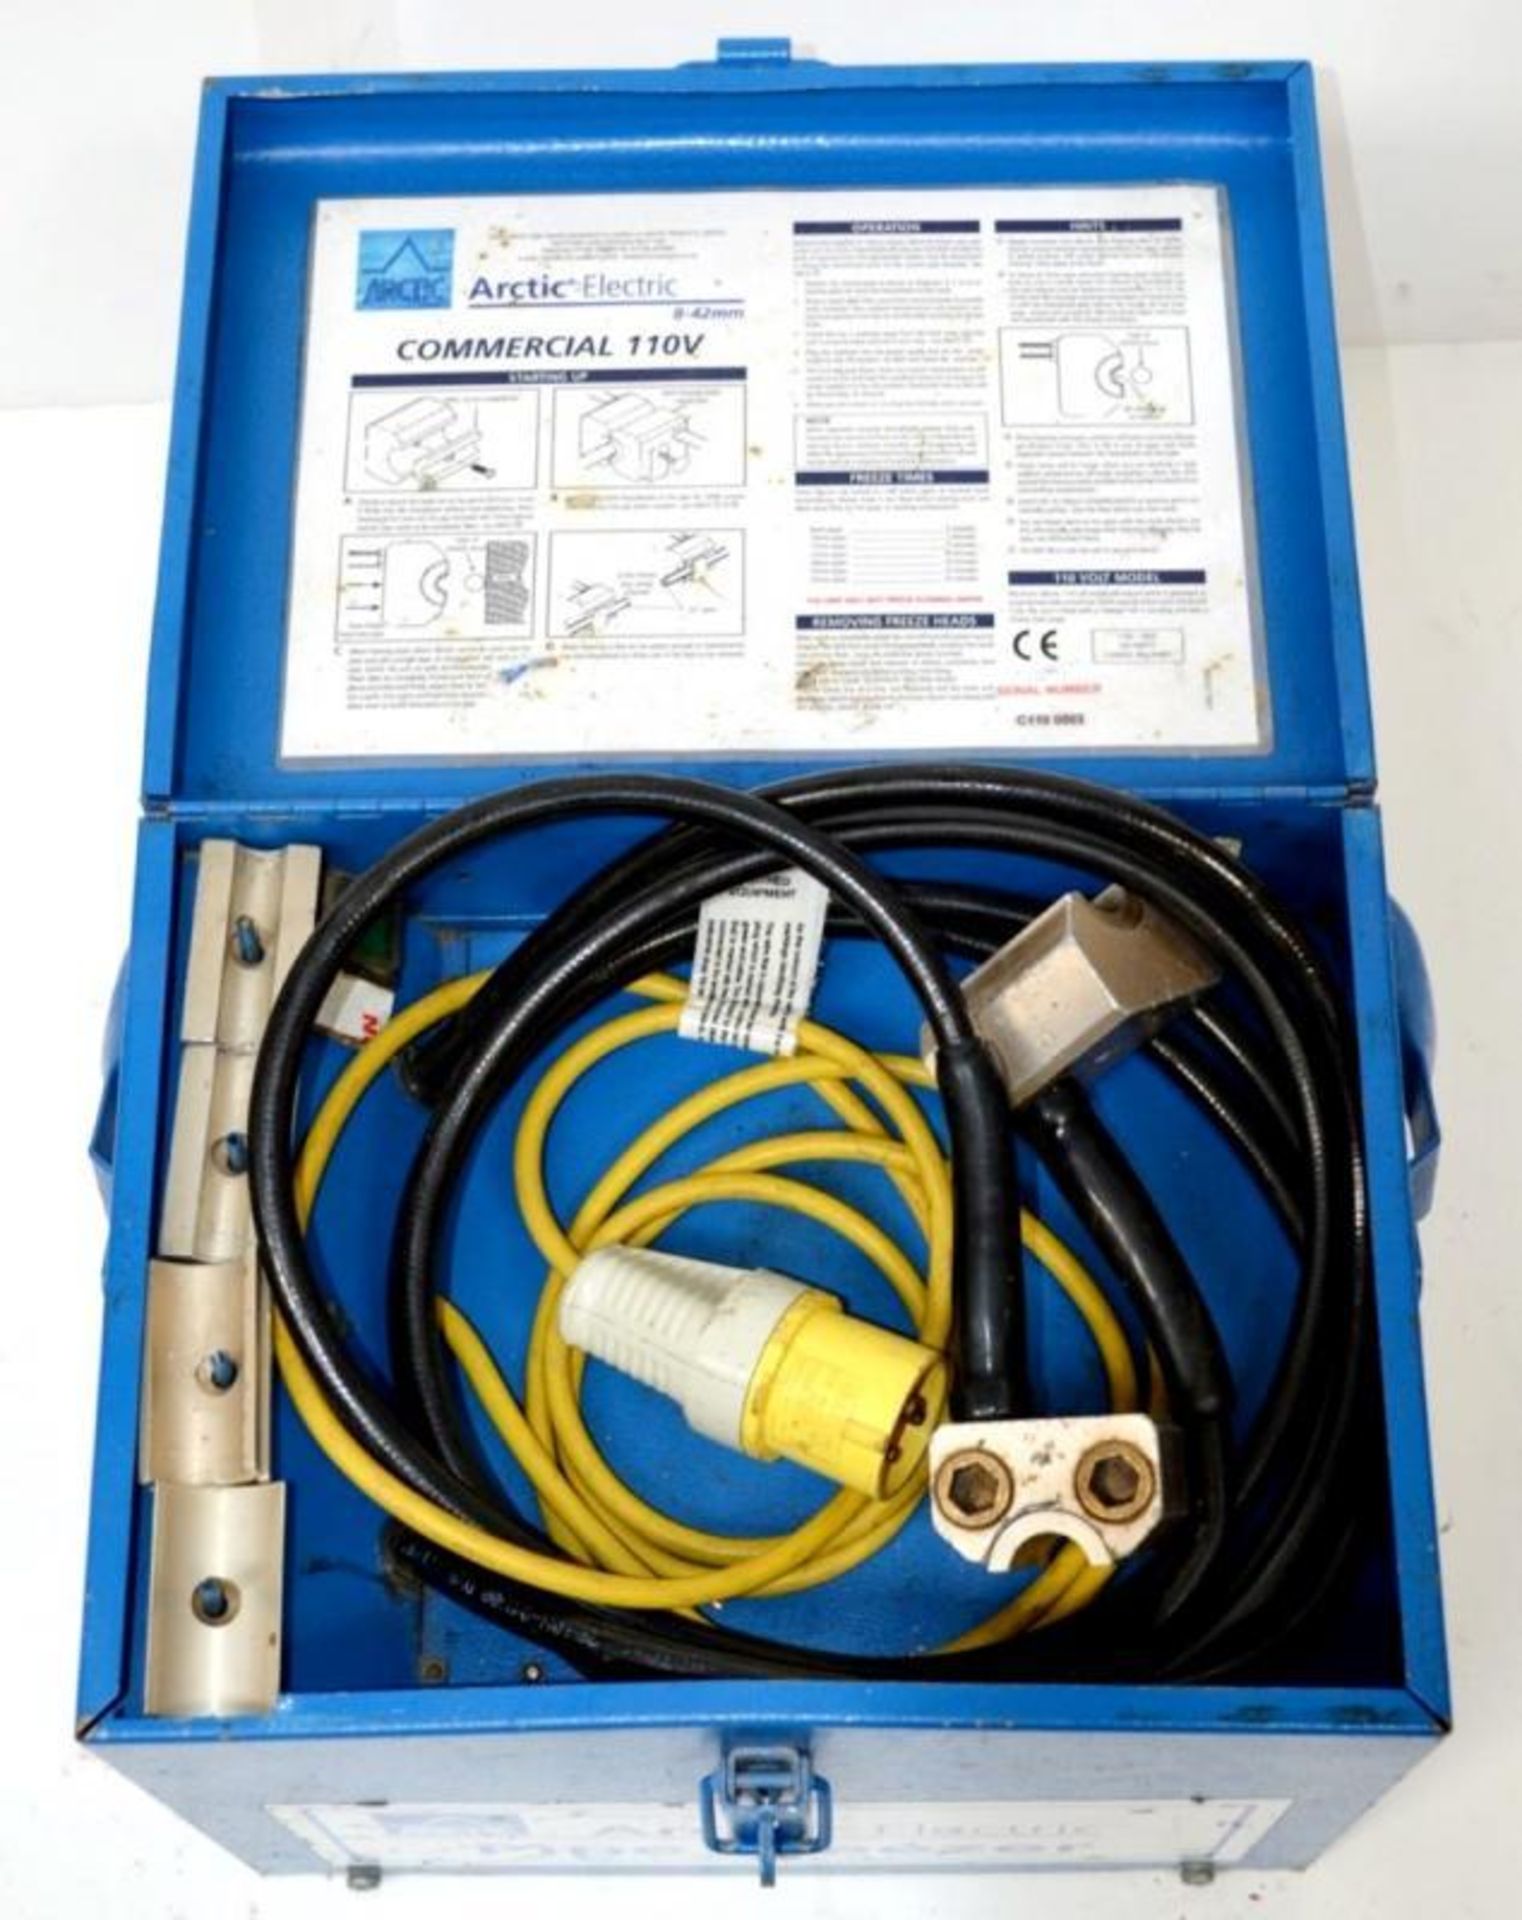 1 x Freeze Master Arctic Freeze Electric Pipe Freezer 110 volt - Used In Working Order - MWI014 - - Image 8 of 10